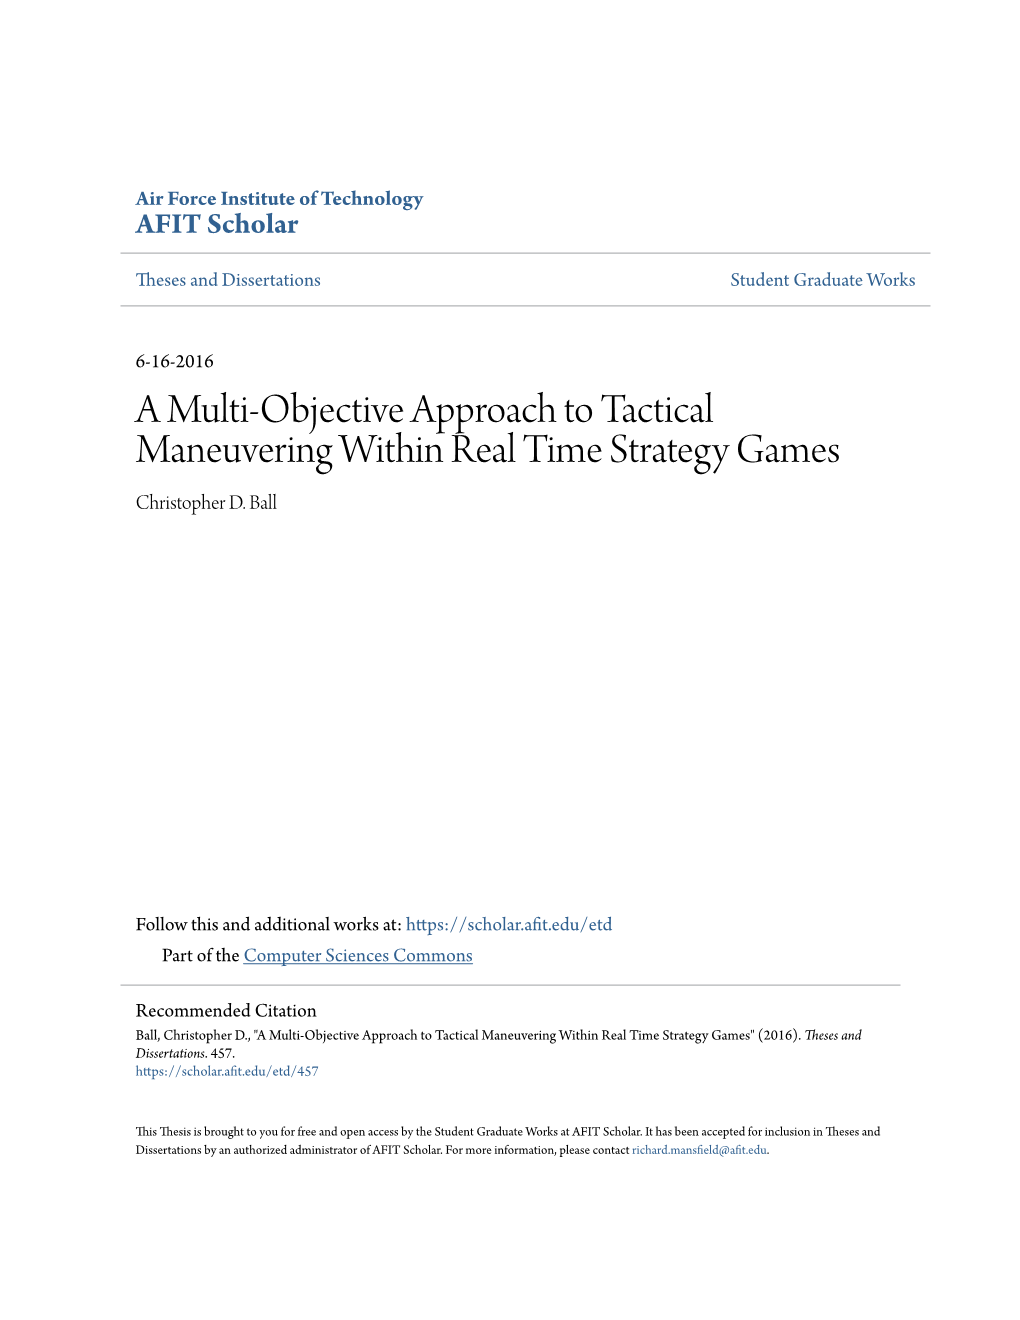 A Multi-Objective Approach to Tactical Maneuvering Within Real Time Strategy Games Christopher D